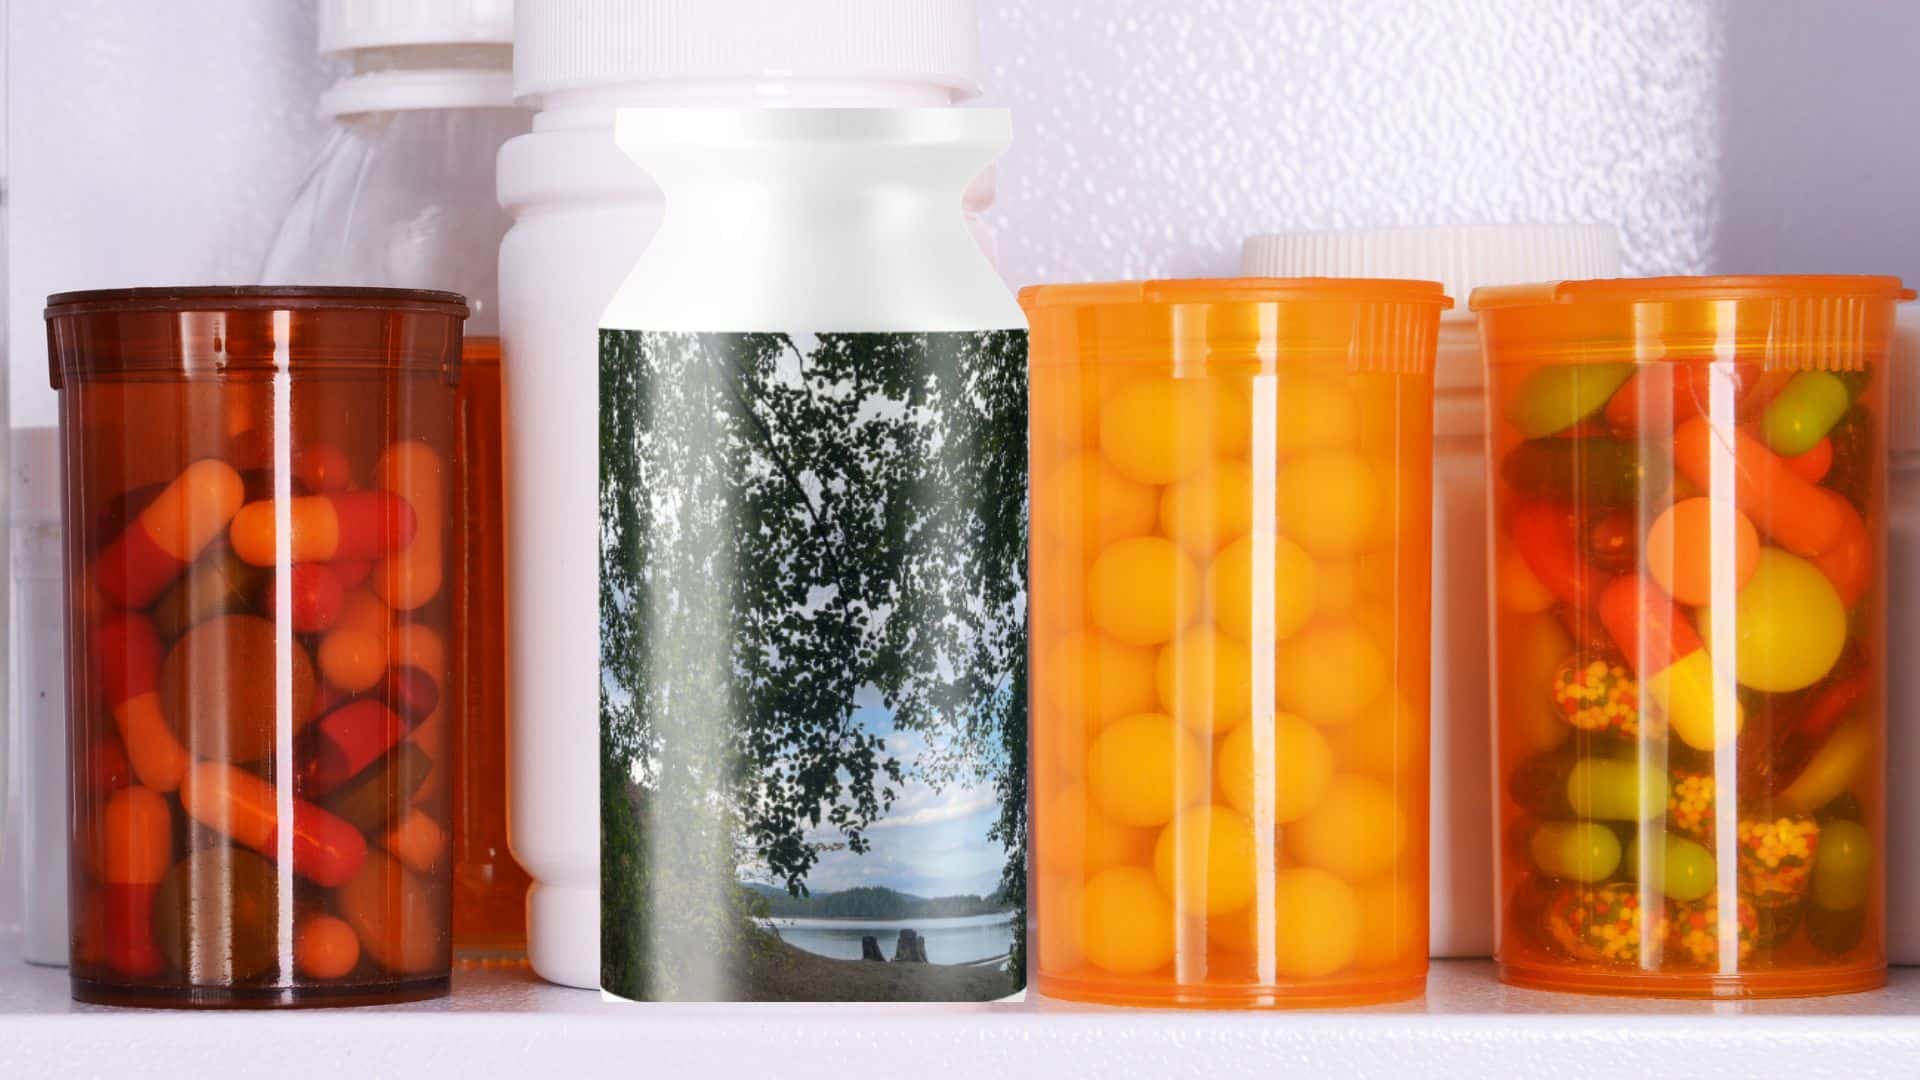 Medicine bottles in a cabinet including one that contains nature.